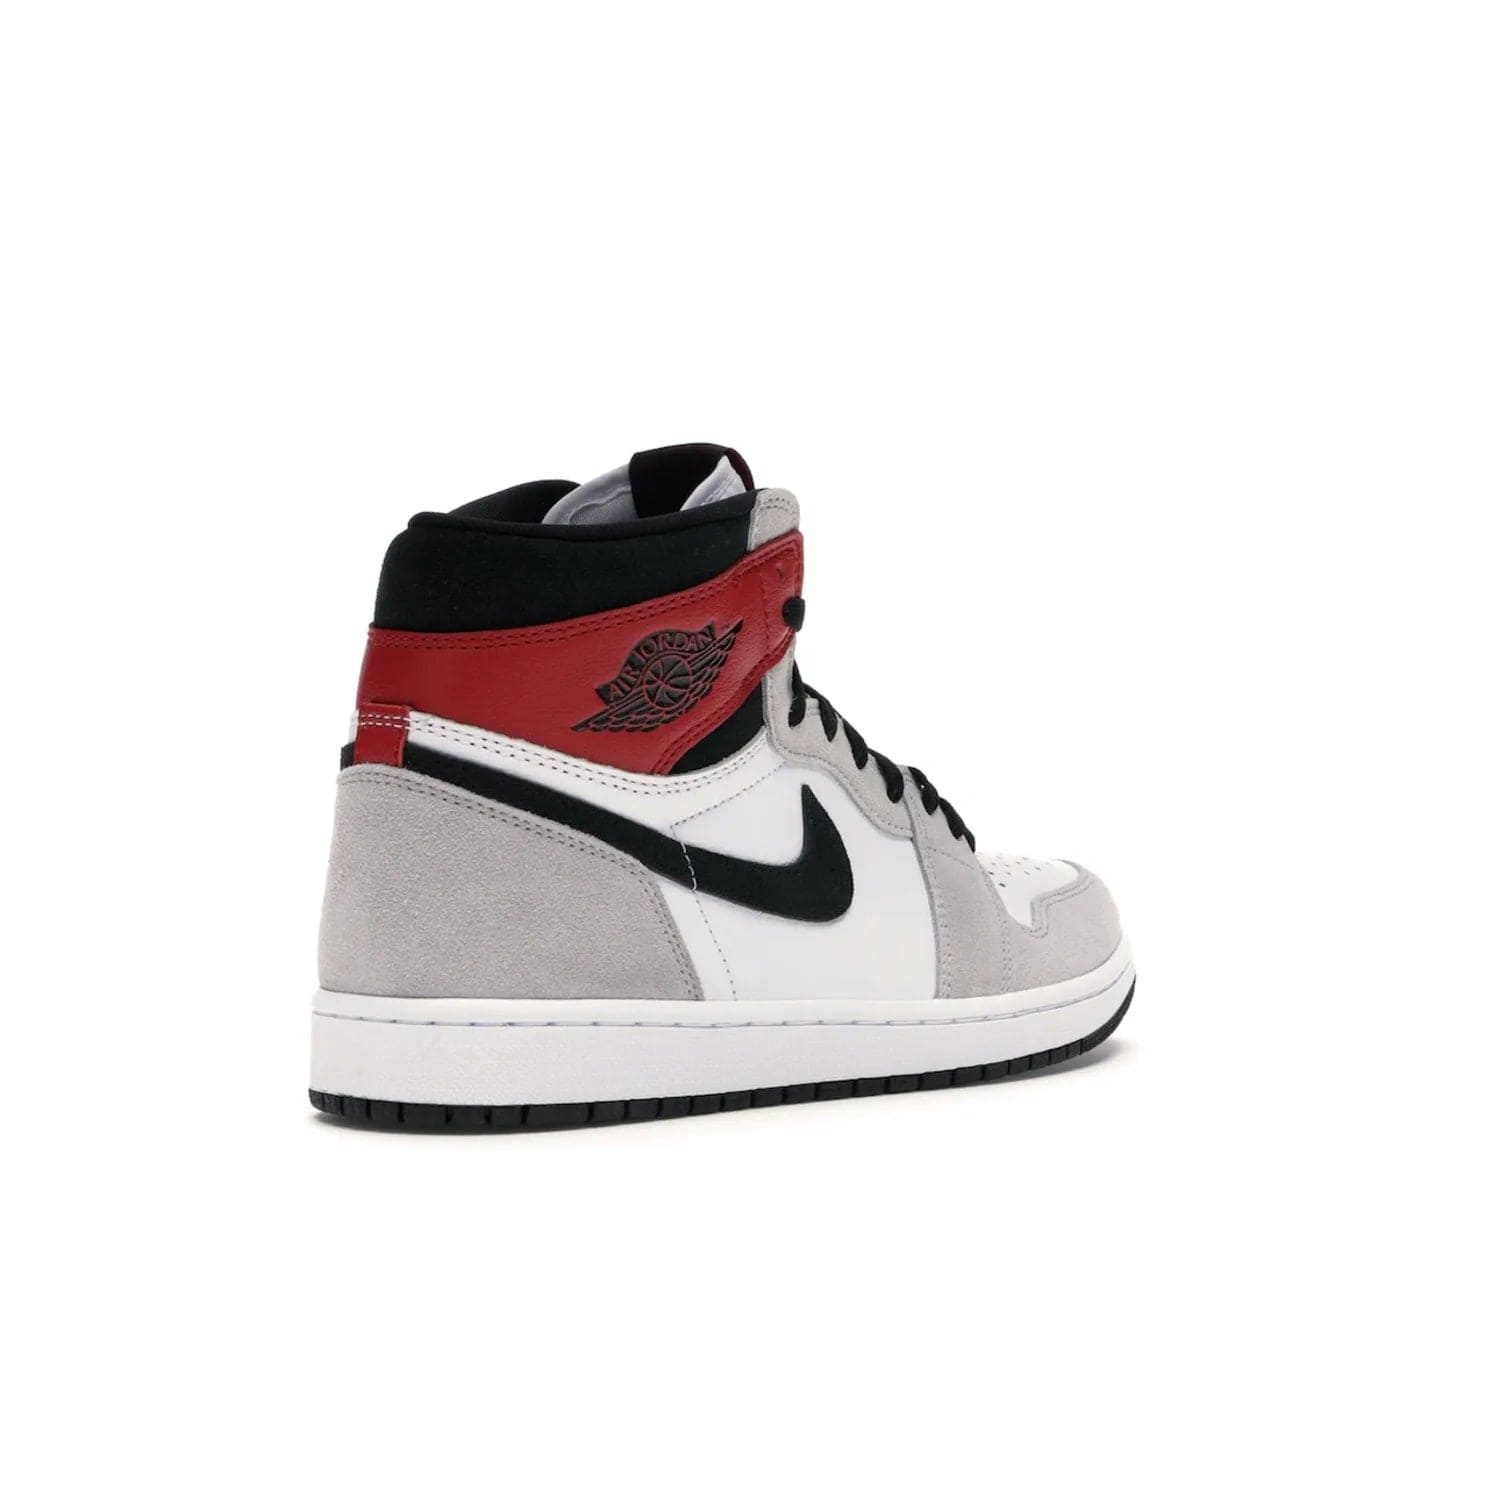 Jordan 1 Retro High Light Smoke Grey - Image 32 - Only at www.BallersClubKickz.com - Comfortable and stylish, Jordan 1 Retro High Light Smoke Grey offers a unique spin on a classic design. White leather, grey suede, red leather and black details are set on a white midsole and black outsole. Get the sneaker released in July 2020 and add a twist to your wardrobe.